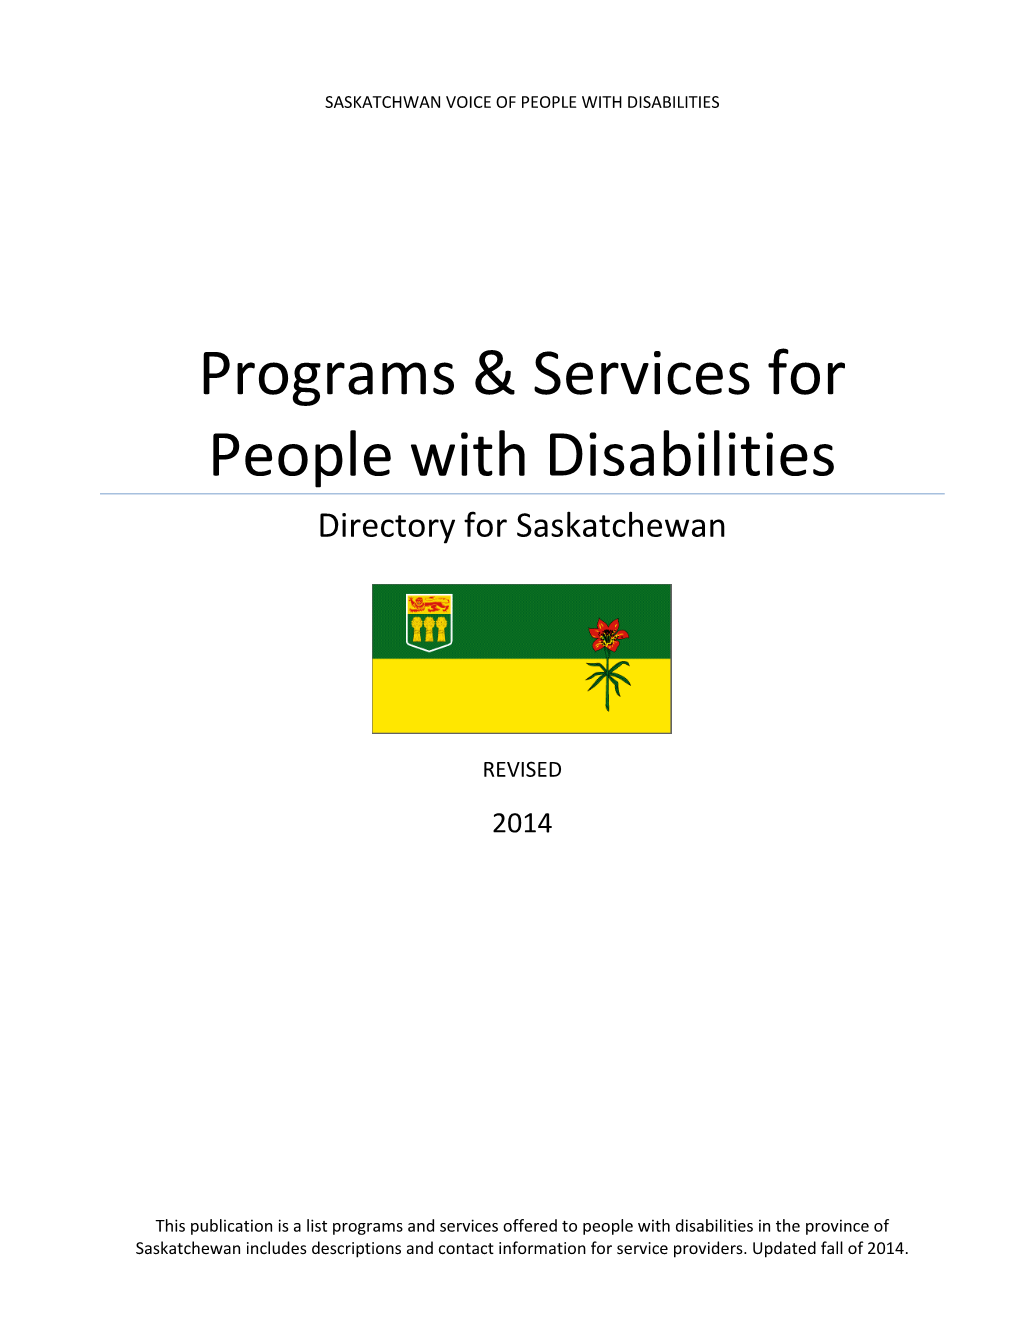 Programs & Services for People with Disabilities